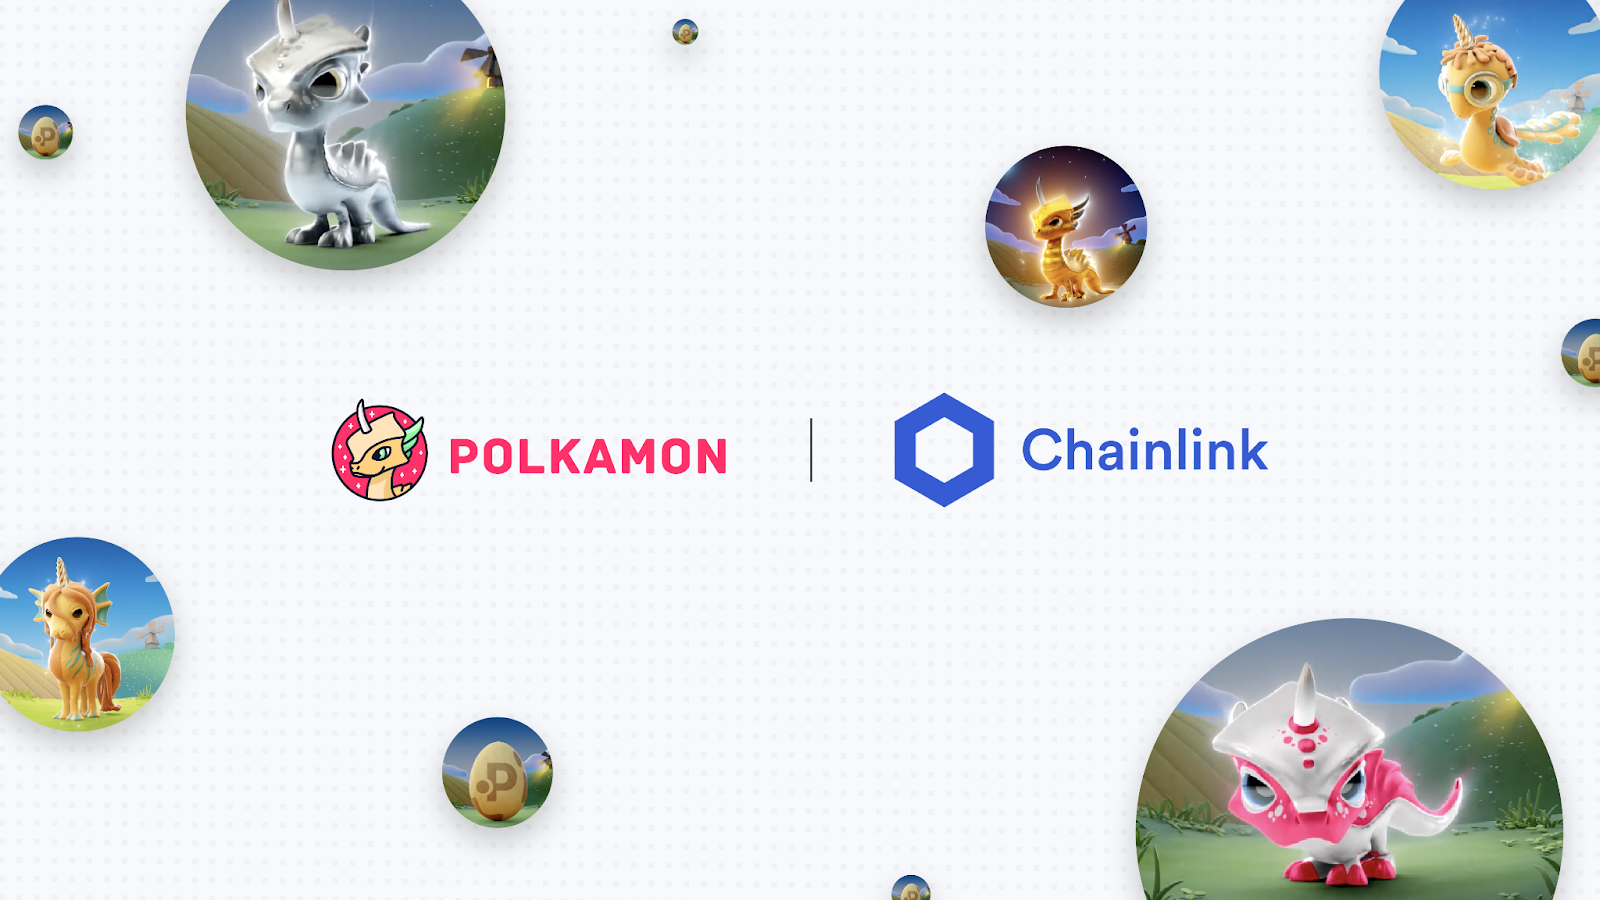 Polkamon Sets Record for Chainlink VRF Calls in Booster ...